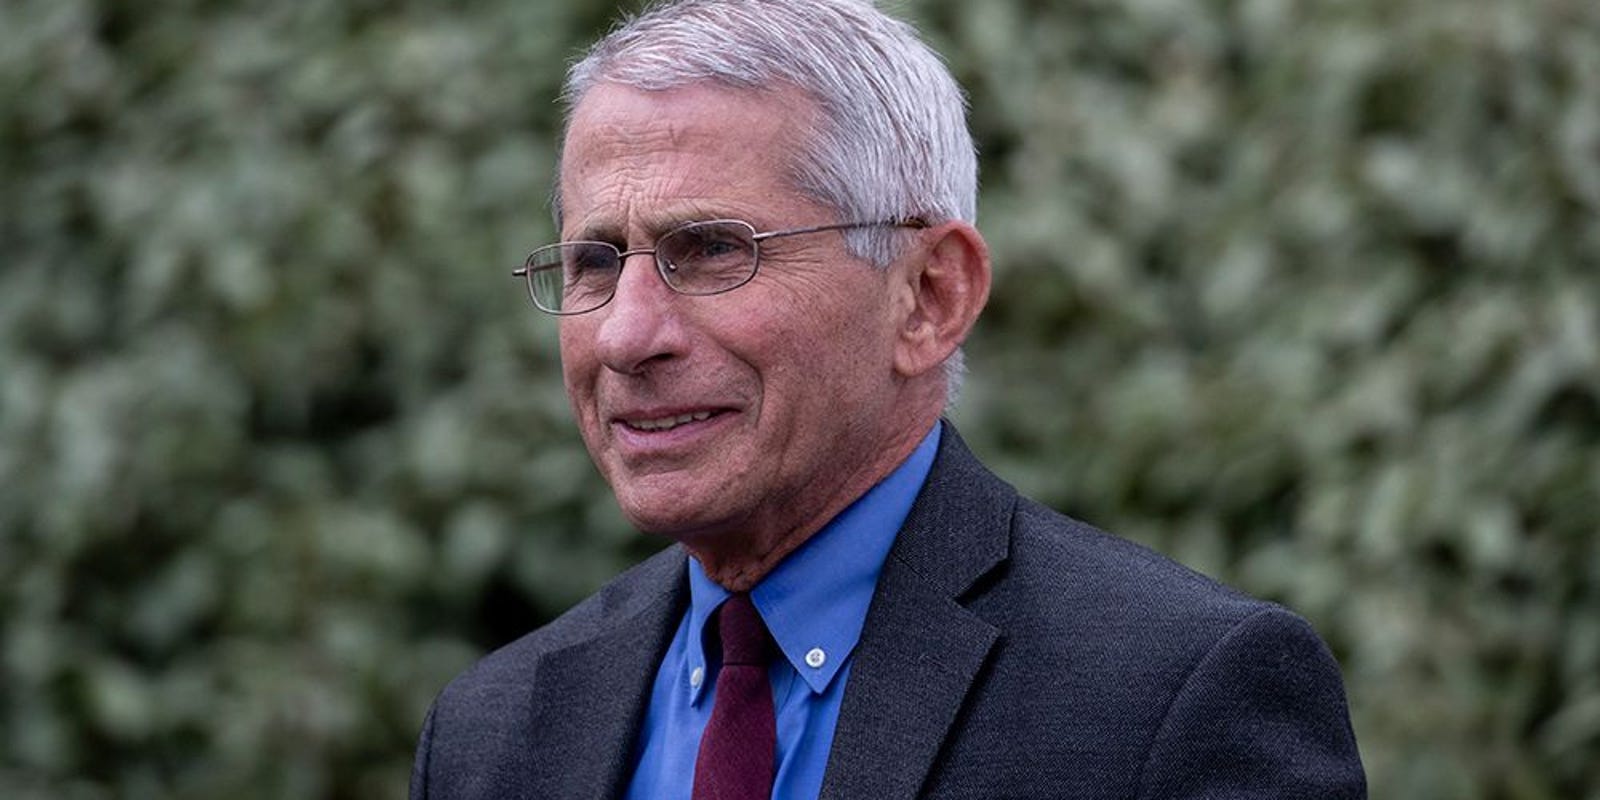 Fauci guided US through AIDS crisis, too. Survivors say it’s a roadmap for coronavirus.